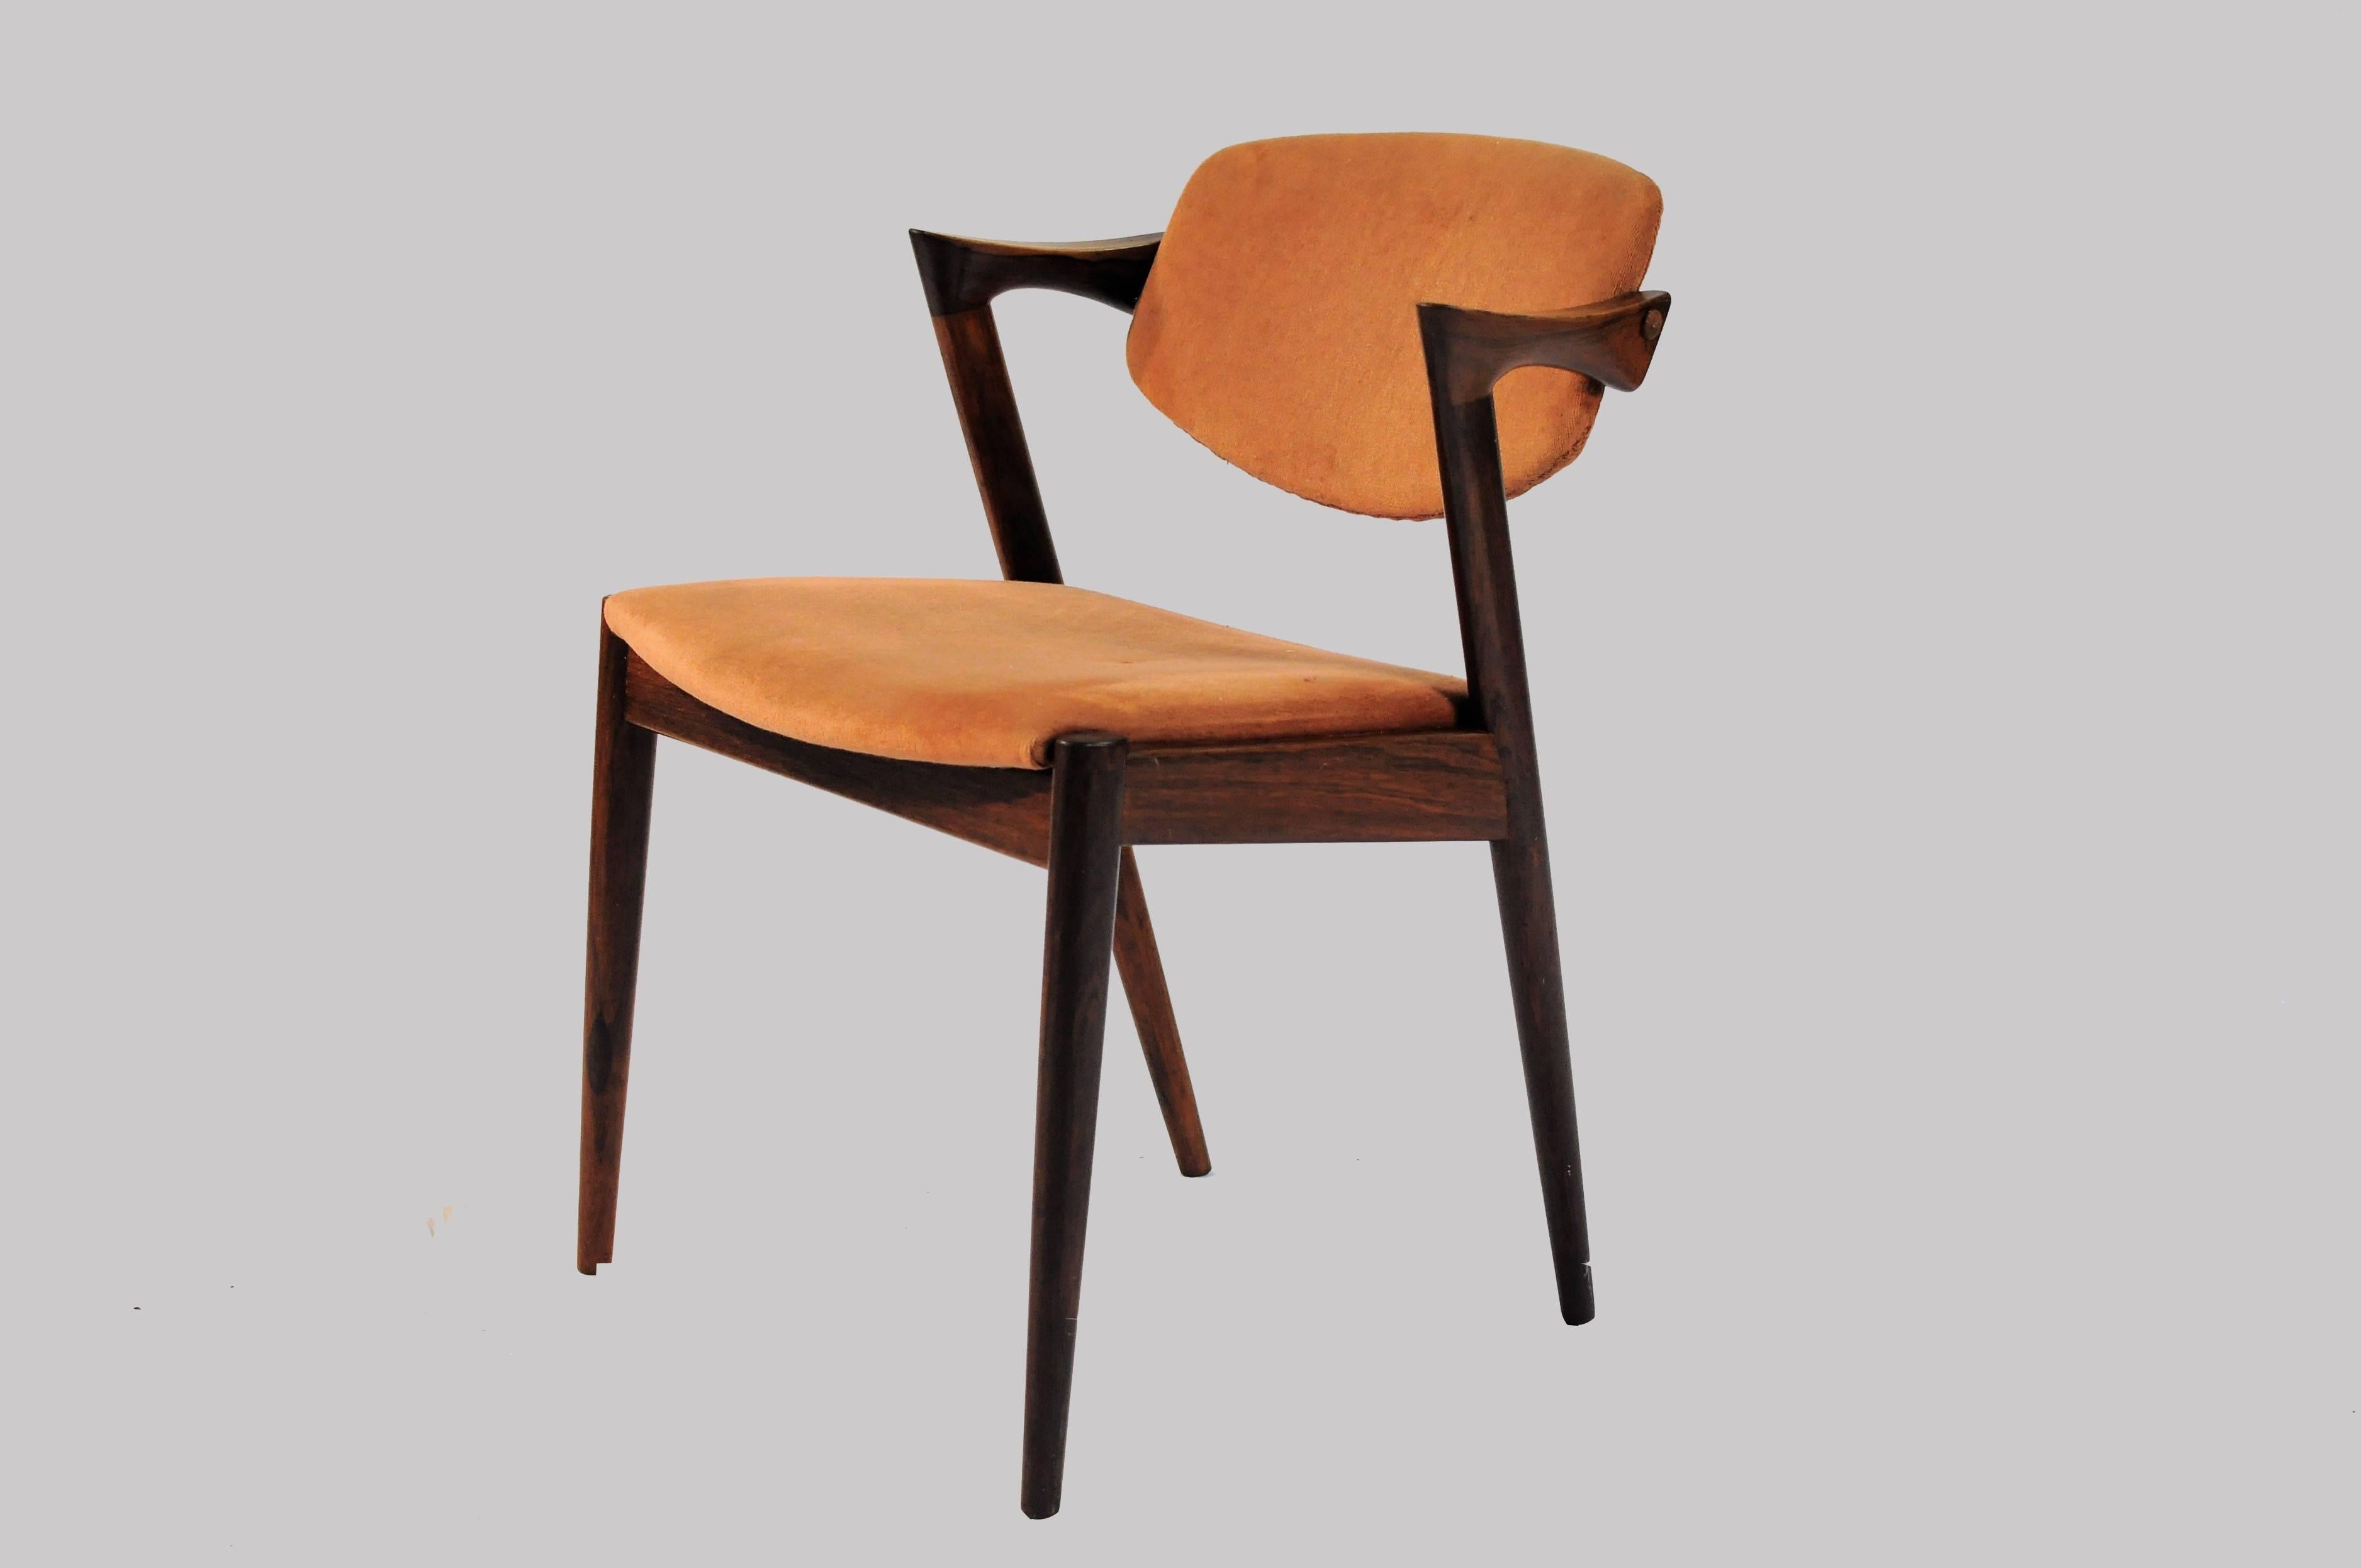 Set of 10 model 42 rosewood dining chairs with adjustable backrest by Kai Kristiansen for Schous Møbelfabrik.

The chairs have Kai Kristiansens typical light and elegant design that make them fit in easily where you want them in your home - a design